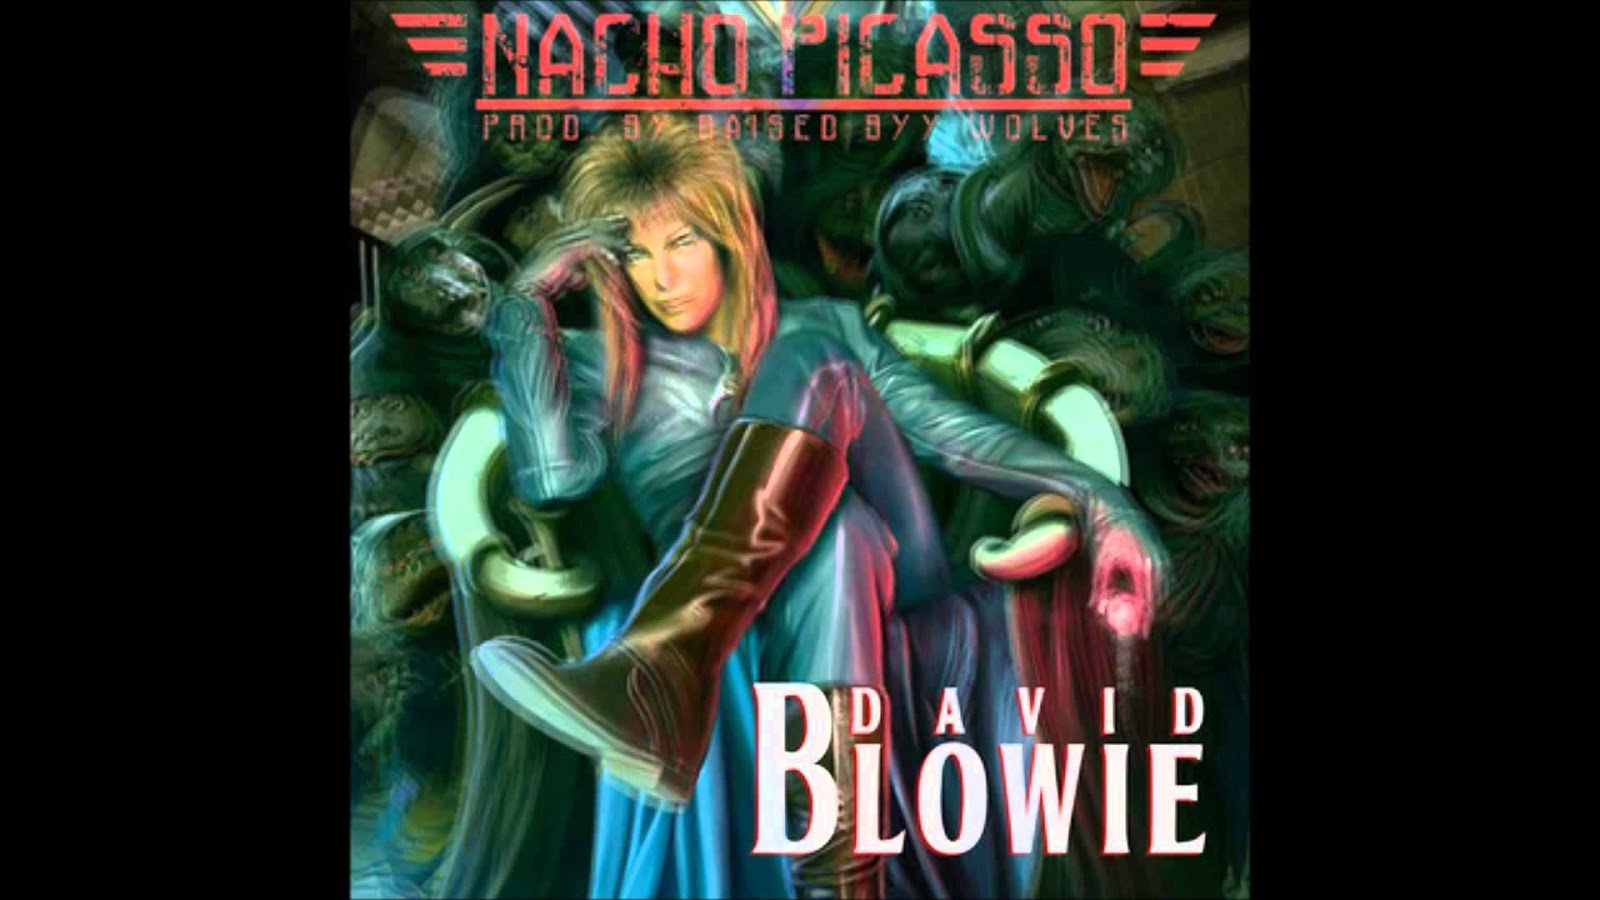 Nacho Picasso featuring David Bowie - "David Blowie" (Produced by Raised By Wolves)